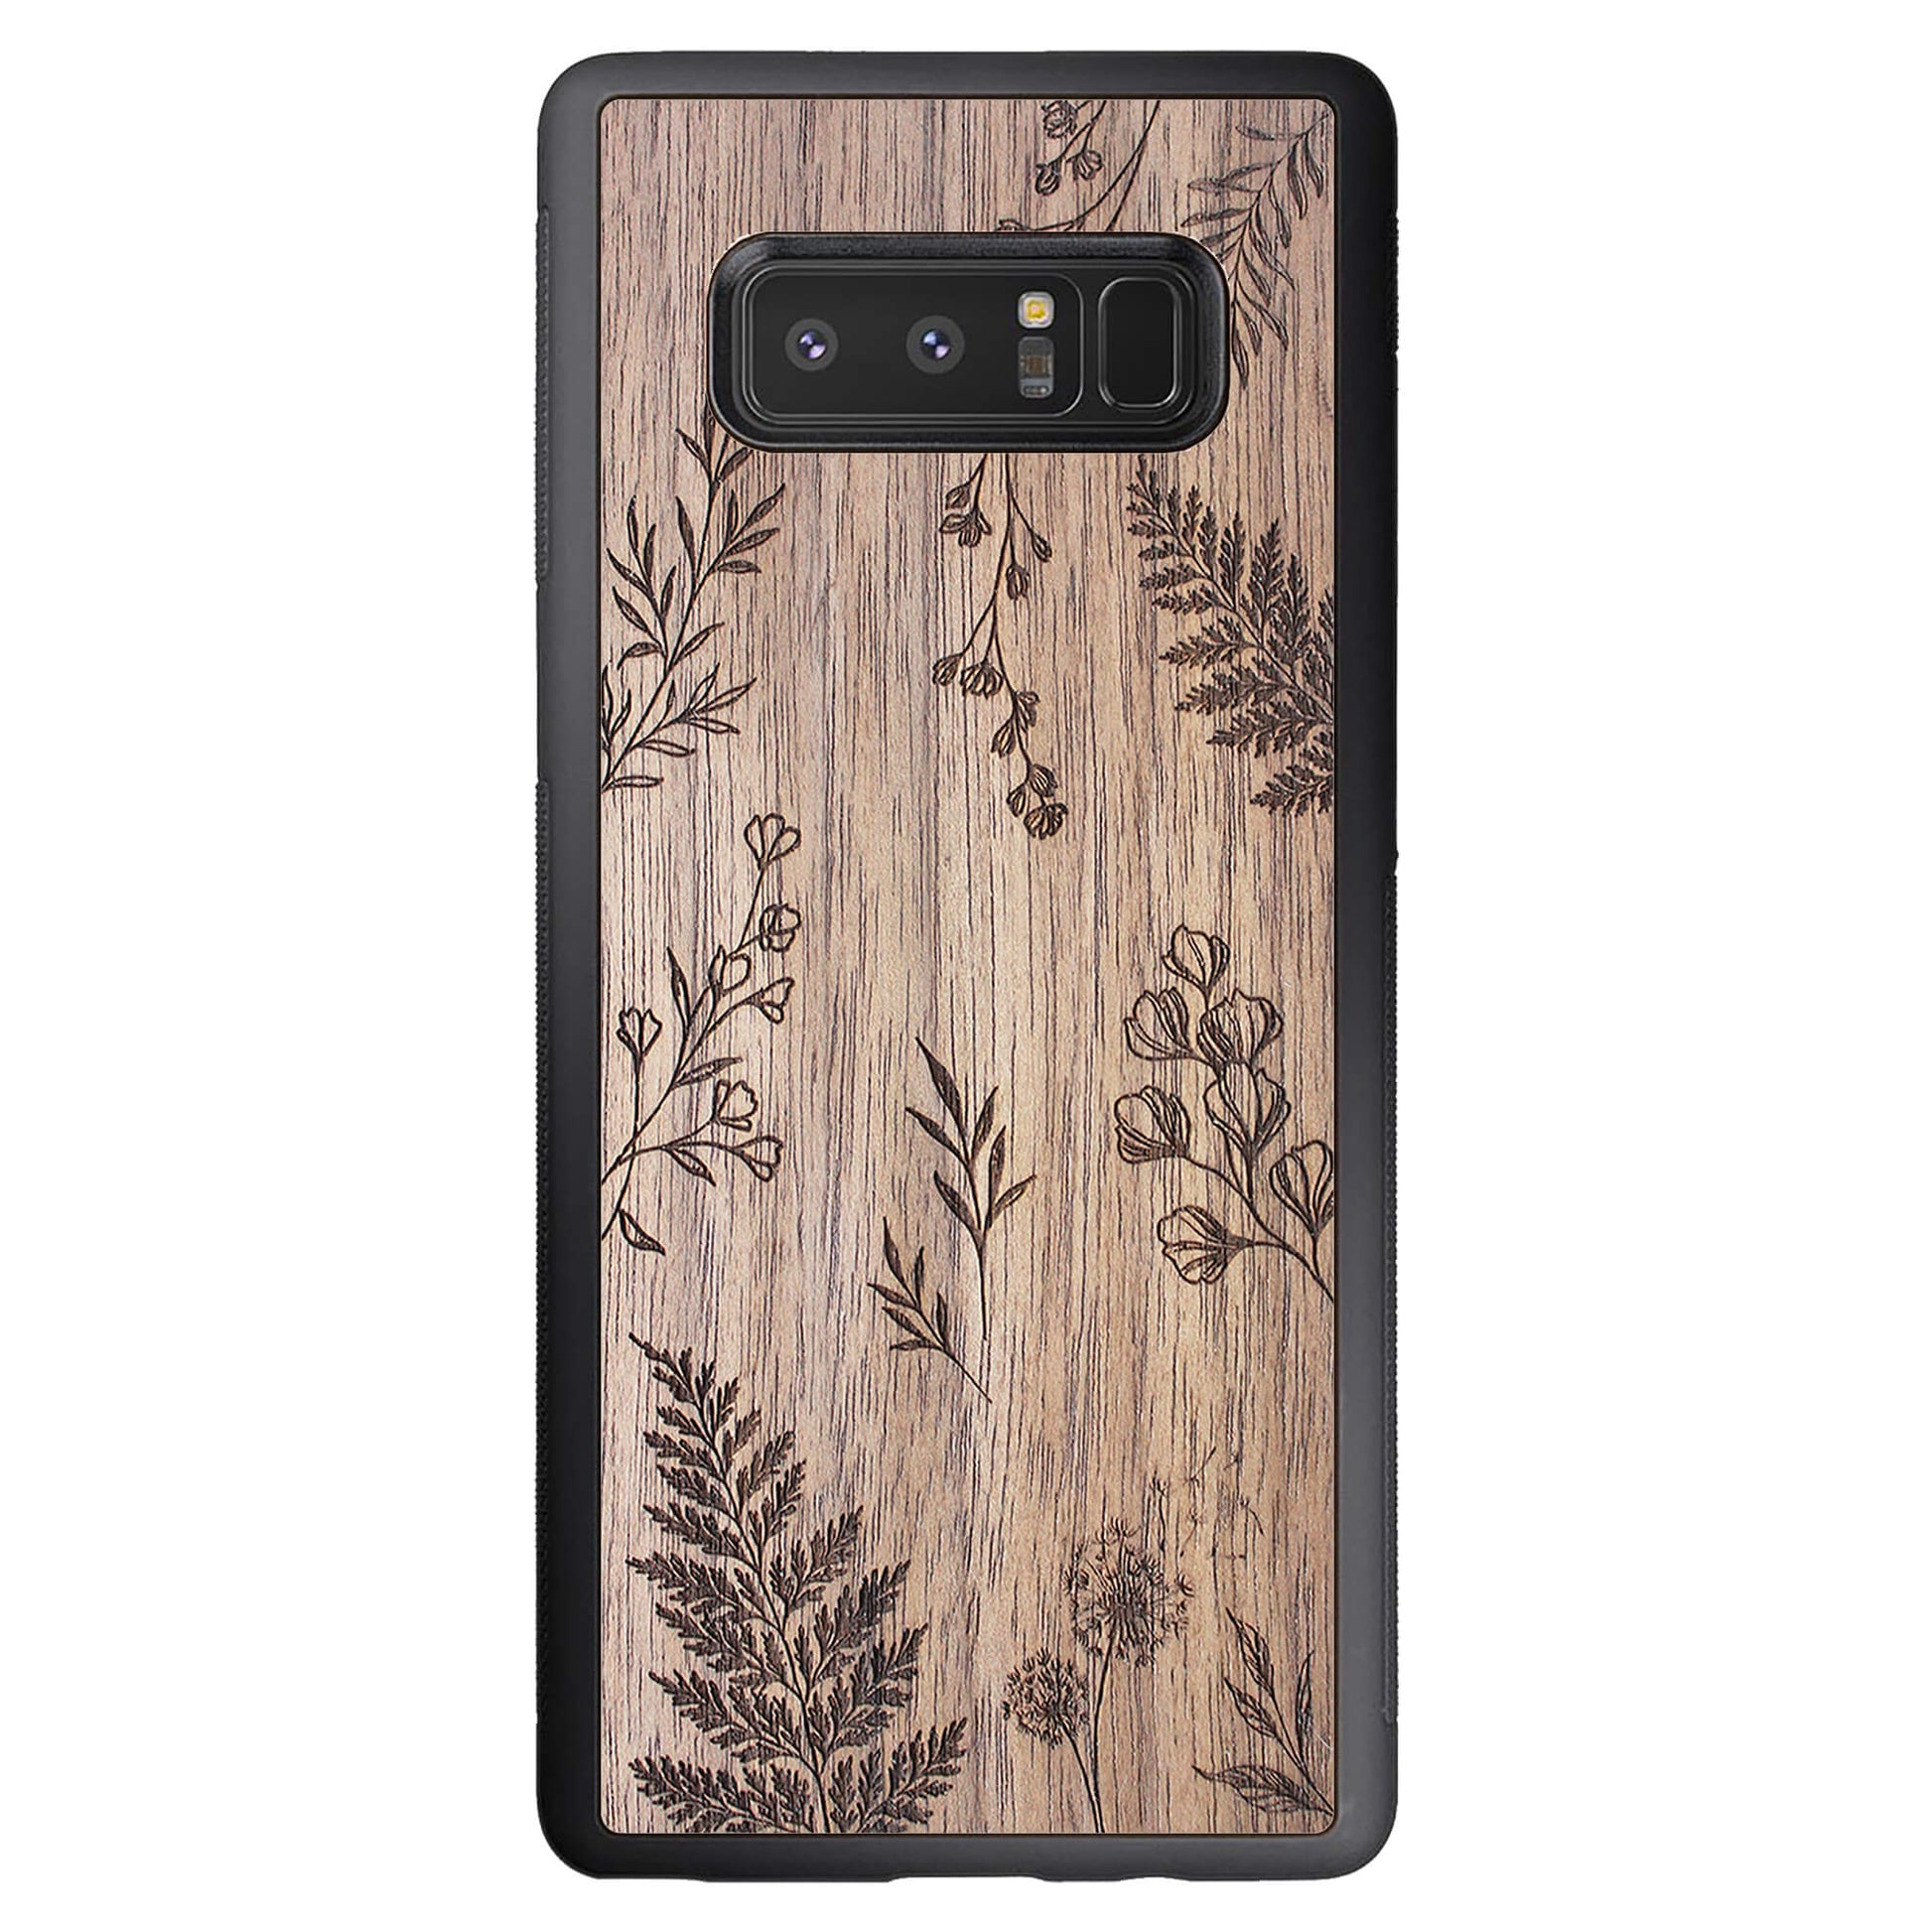 Wooden Case for Samsung Galaxy Note 8 Botanical